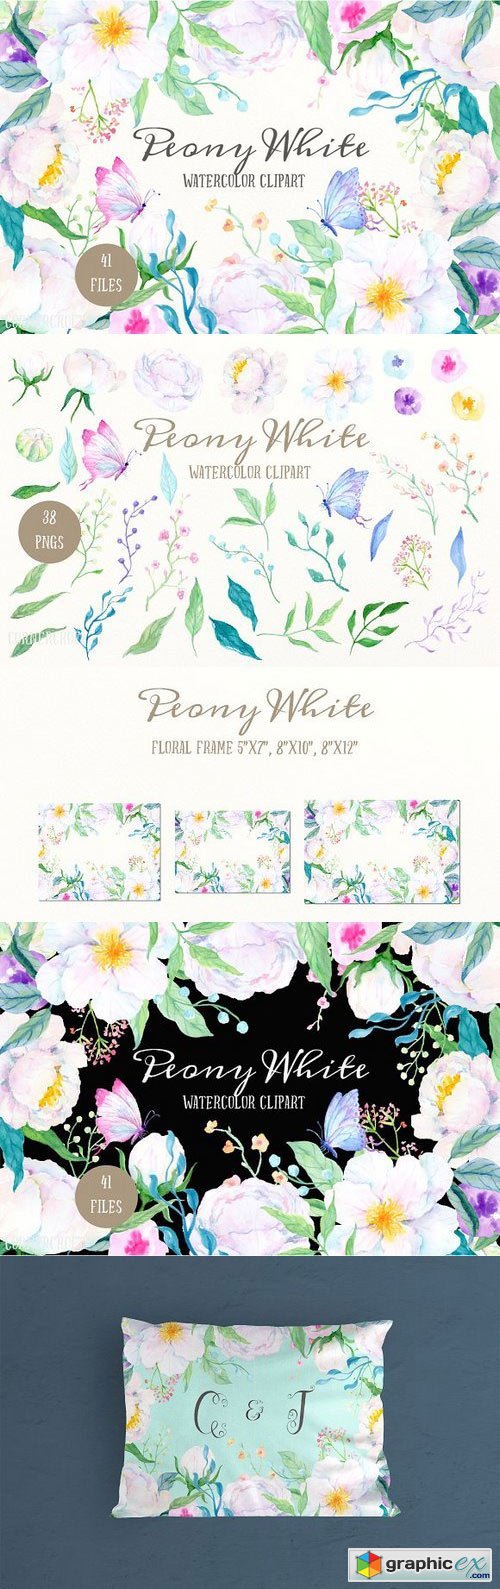 Watercolor Clipart Peony White